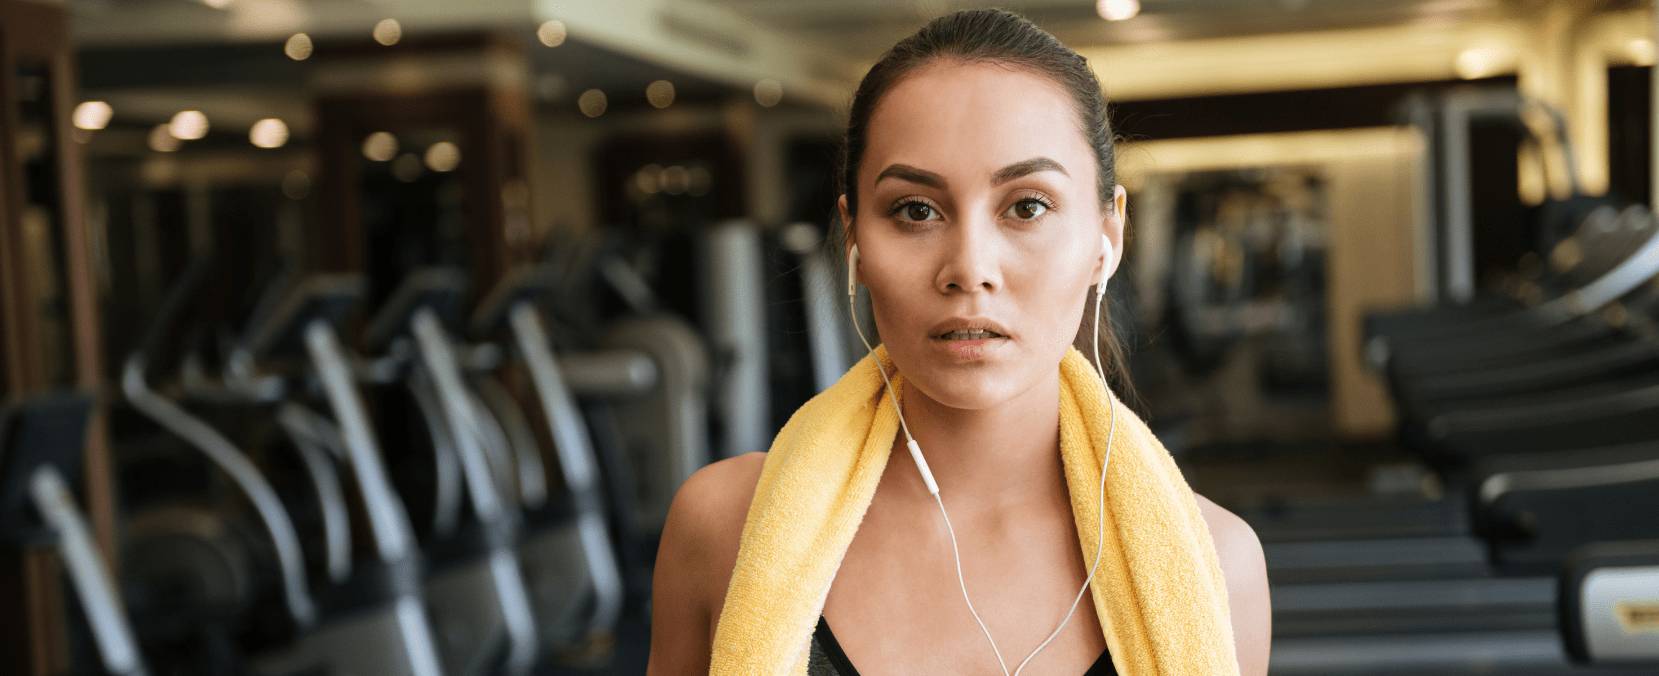 Healthy Skin from U Perform - Lady at the gym with really healthy skin